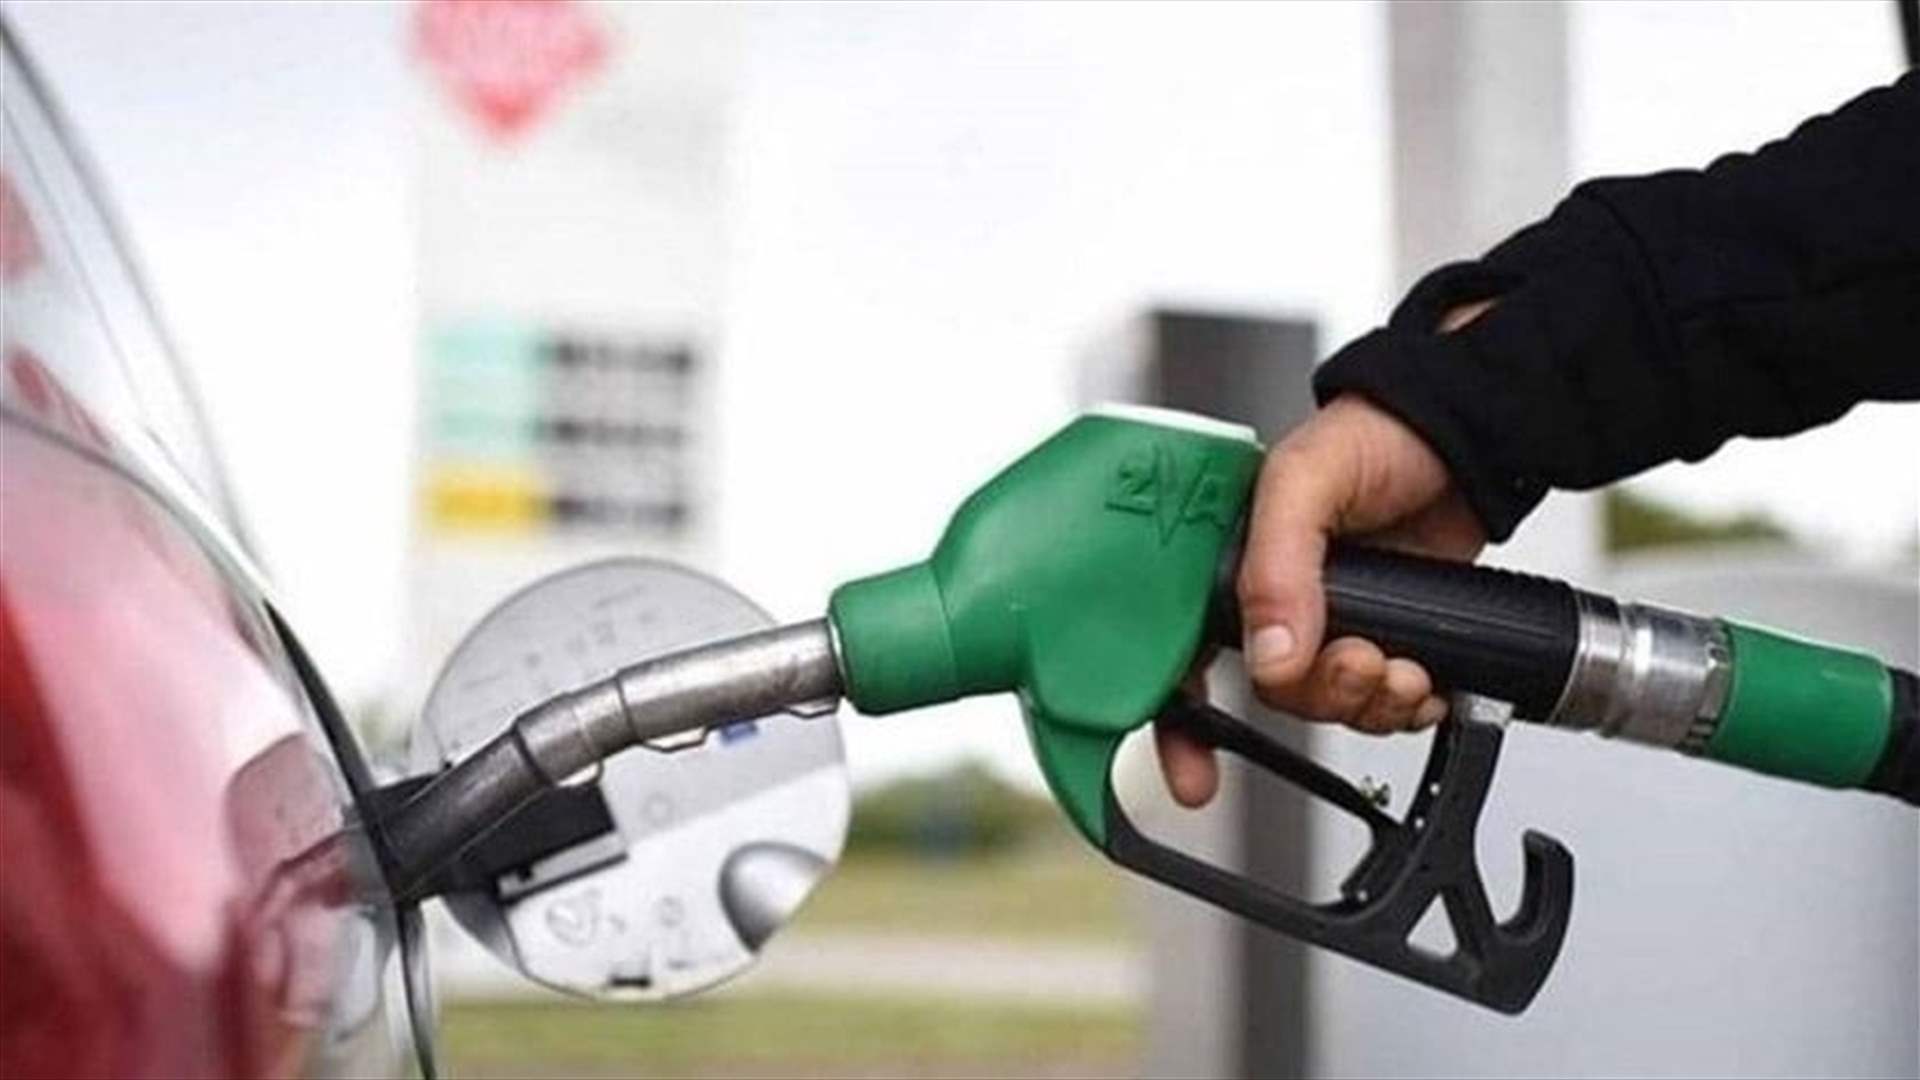 Price of gasoline drops by 24000 LBP